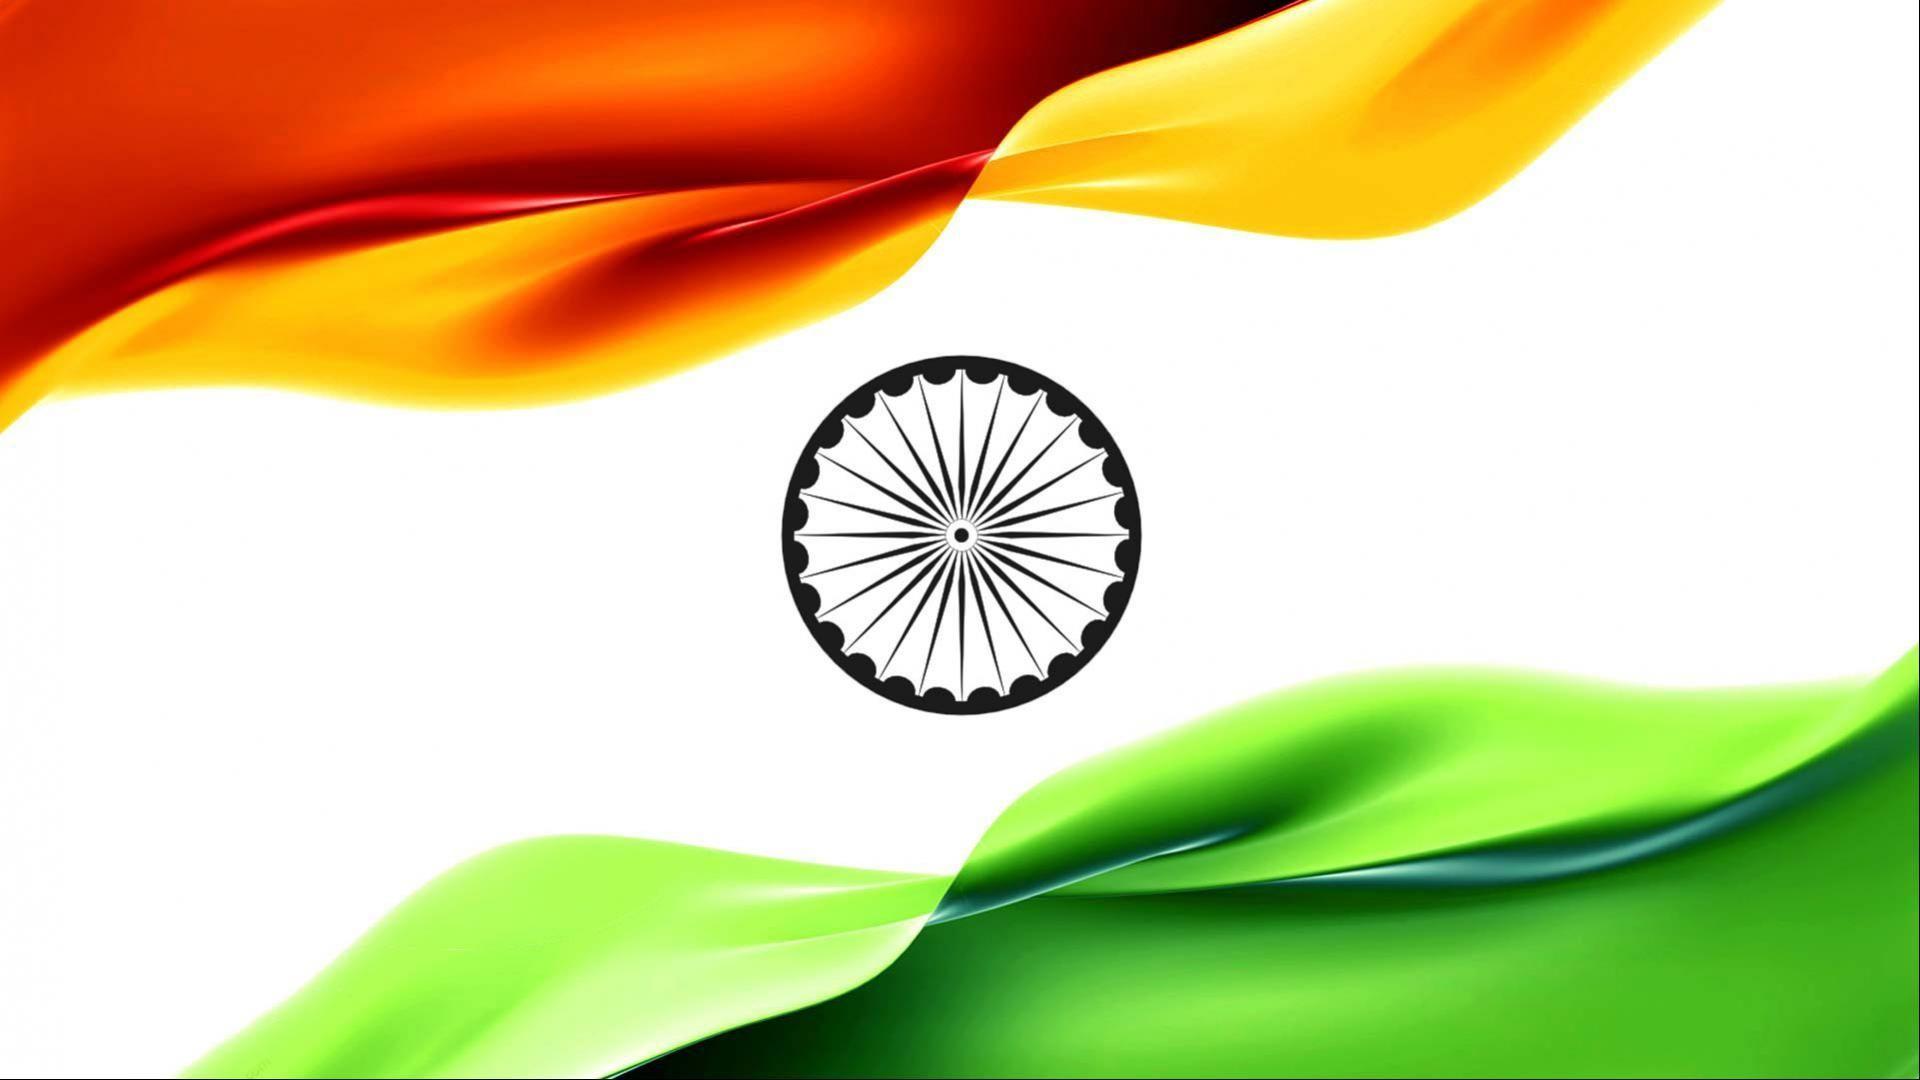 Download Indian Tiranga wallpaper to your cell phone. Free